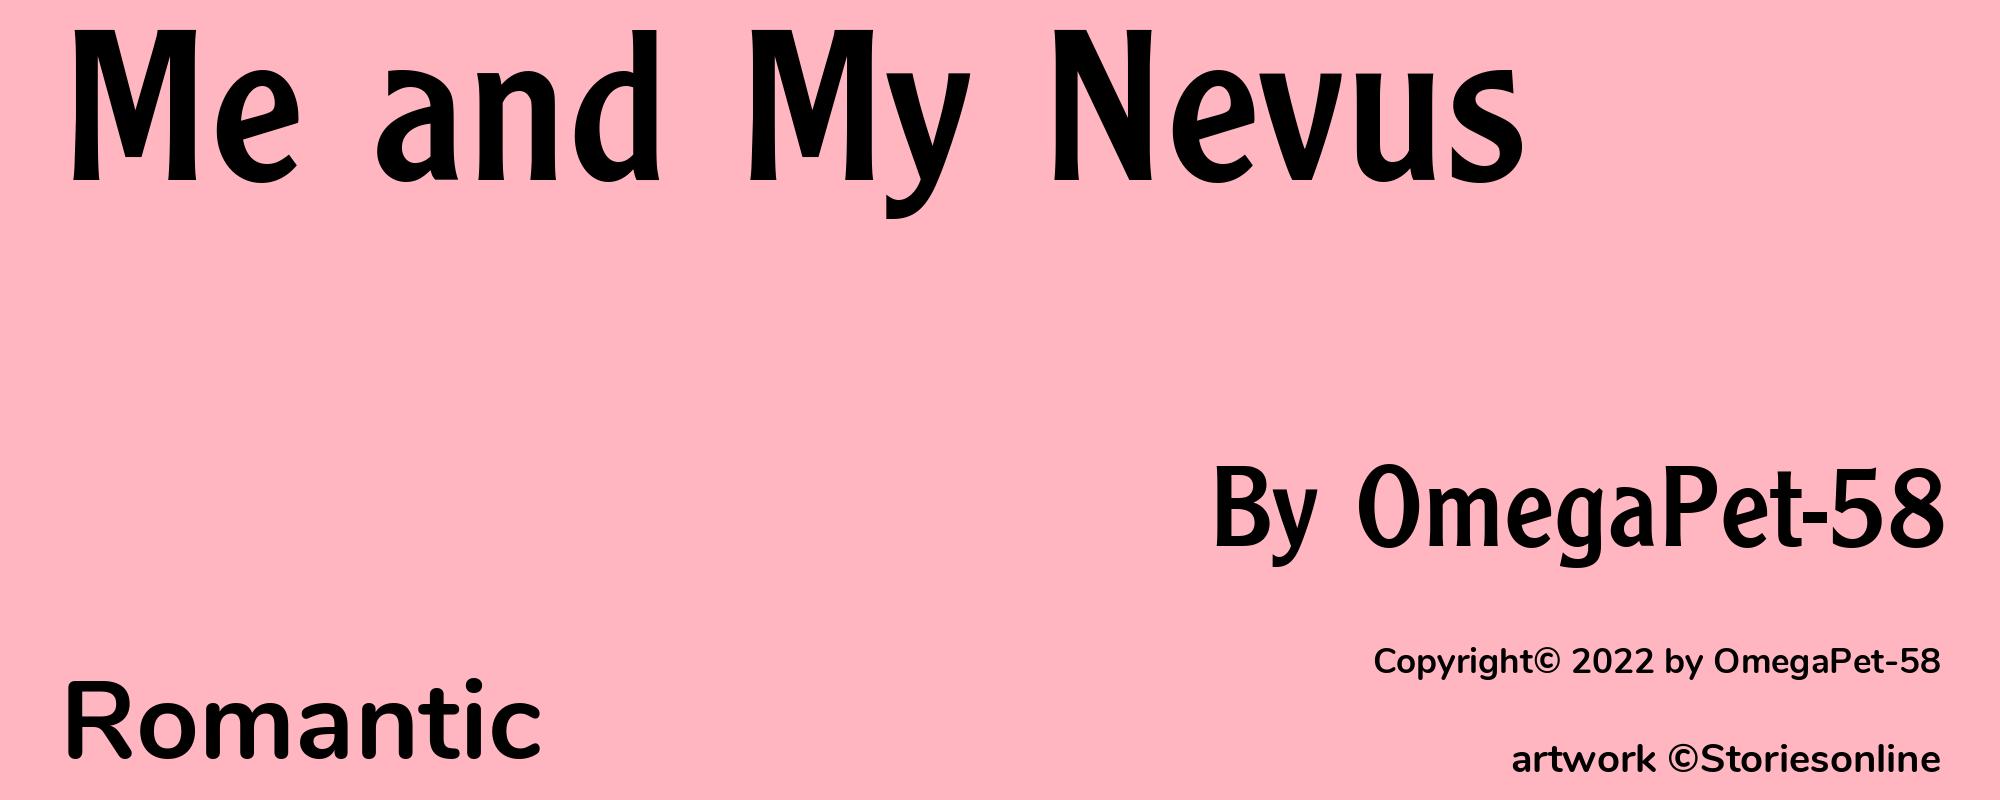 Me and My Nevus - Cover